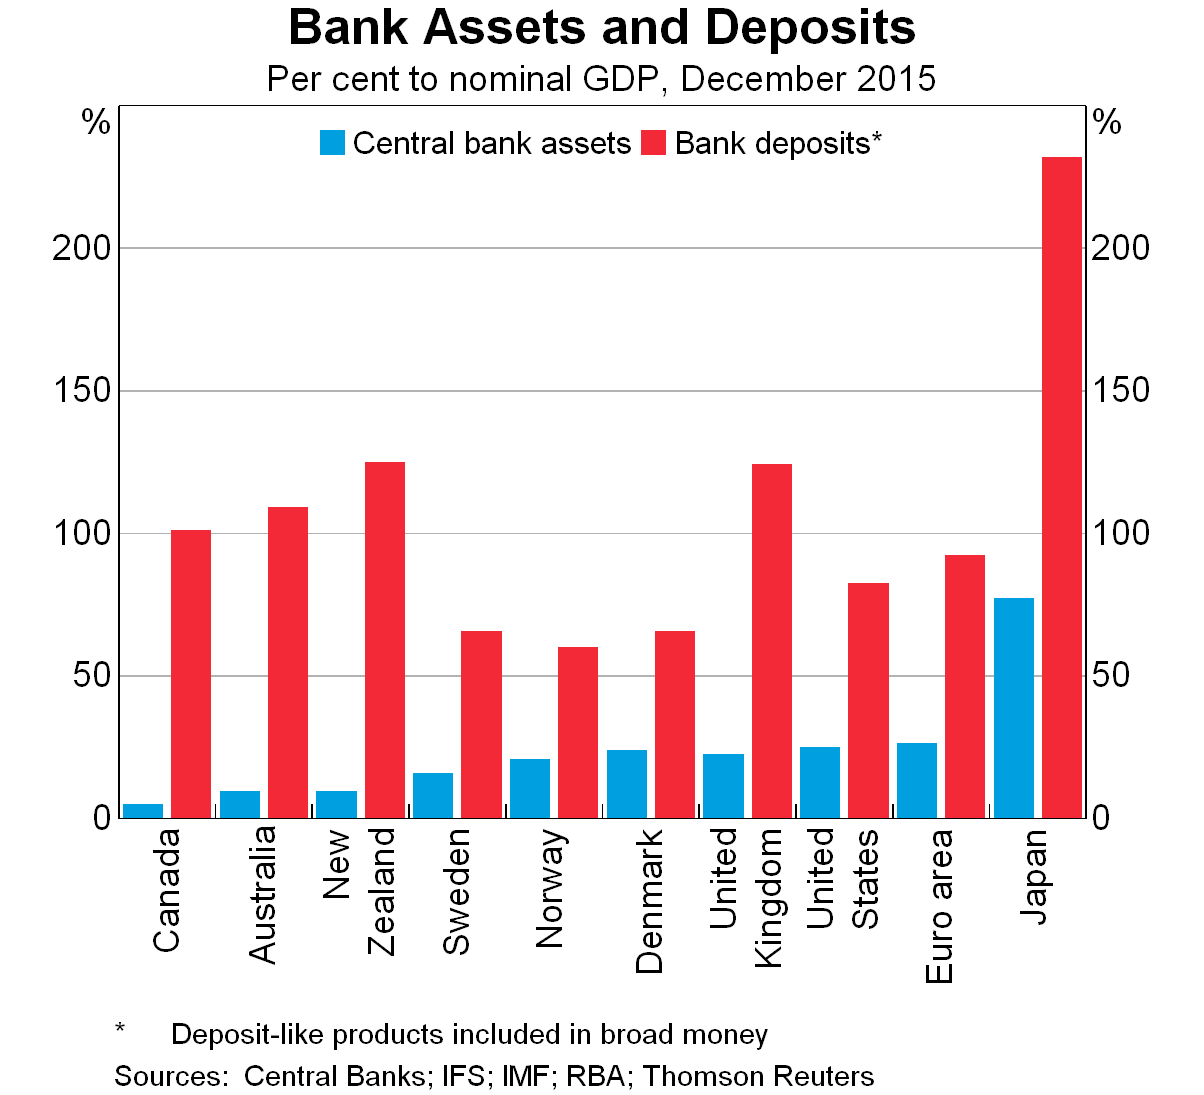 Bank Assets and Deposits